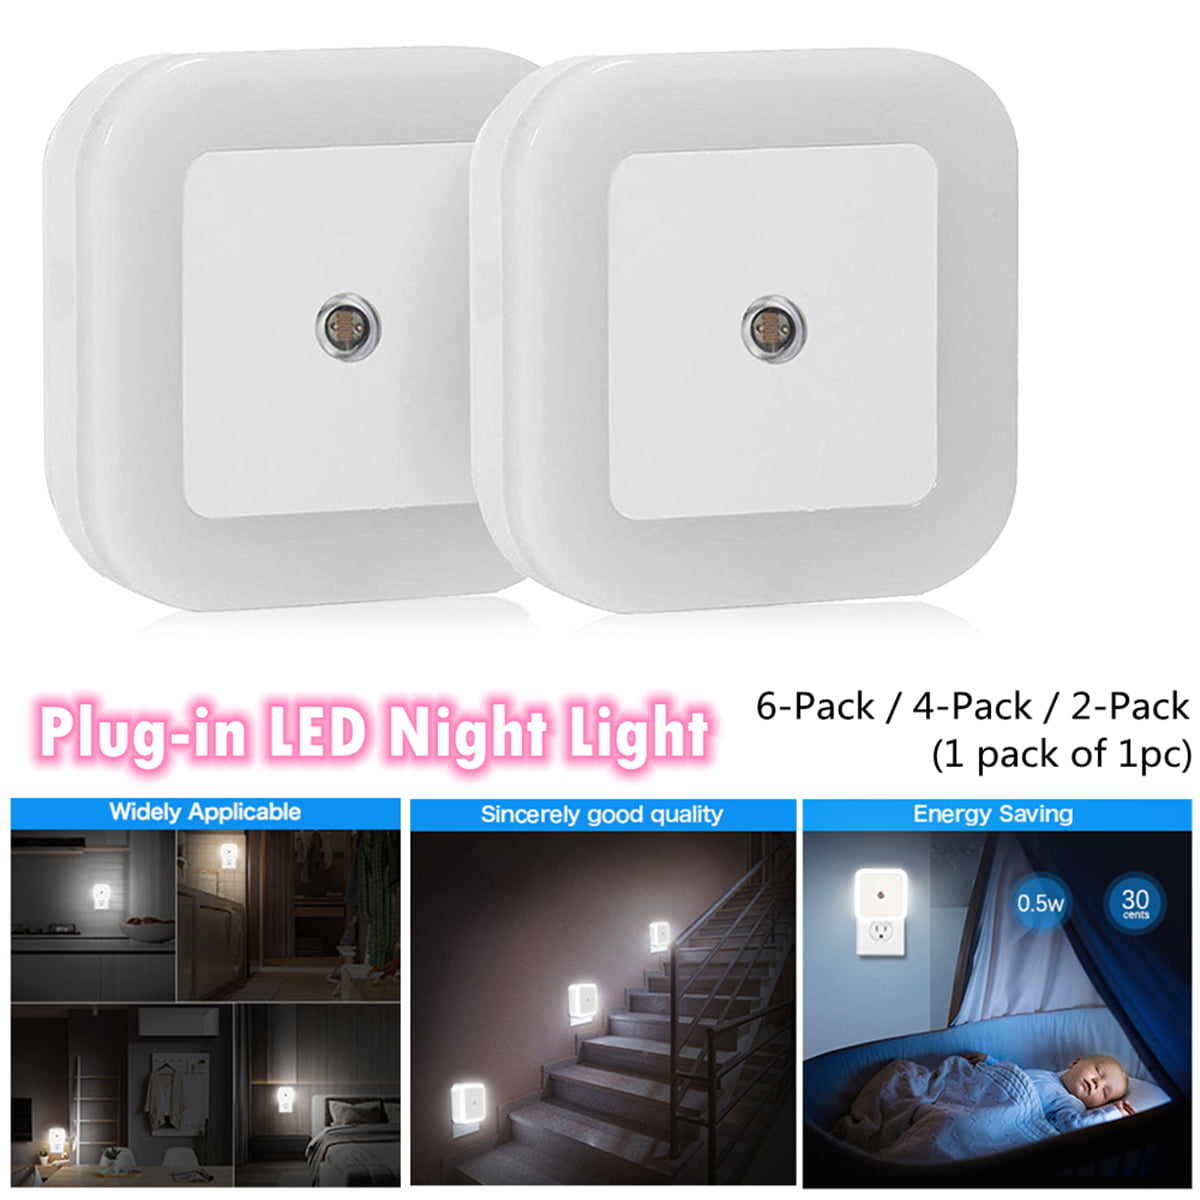 2 Pack Auto On Off LED Plug in Night Light Lamp with Dusk to Dawn Light Sensor 